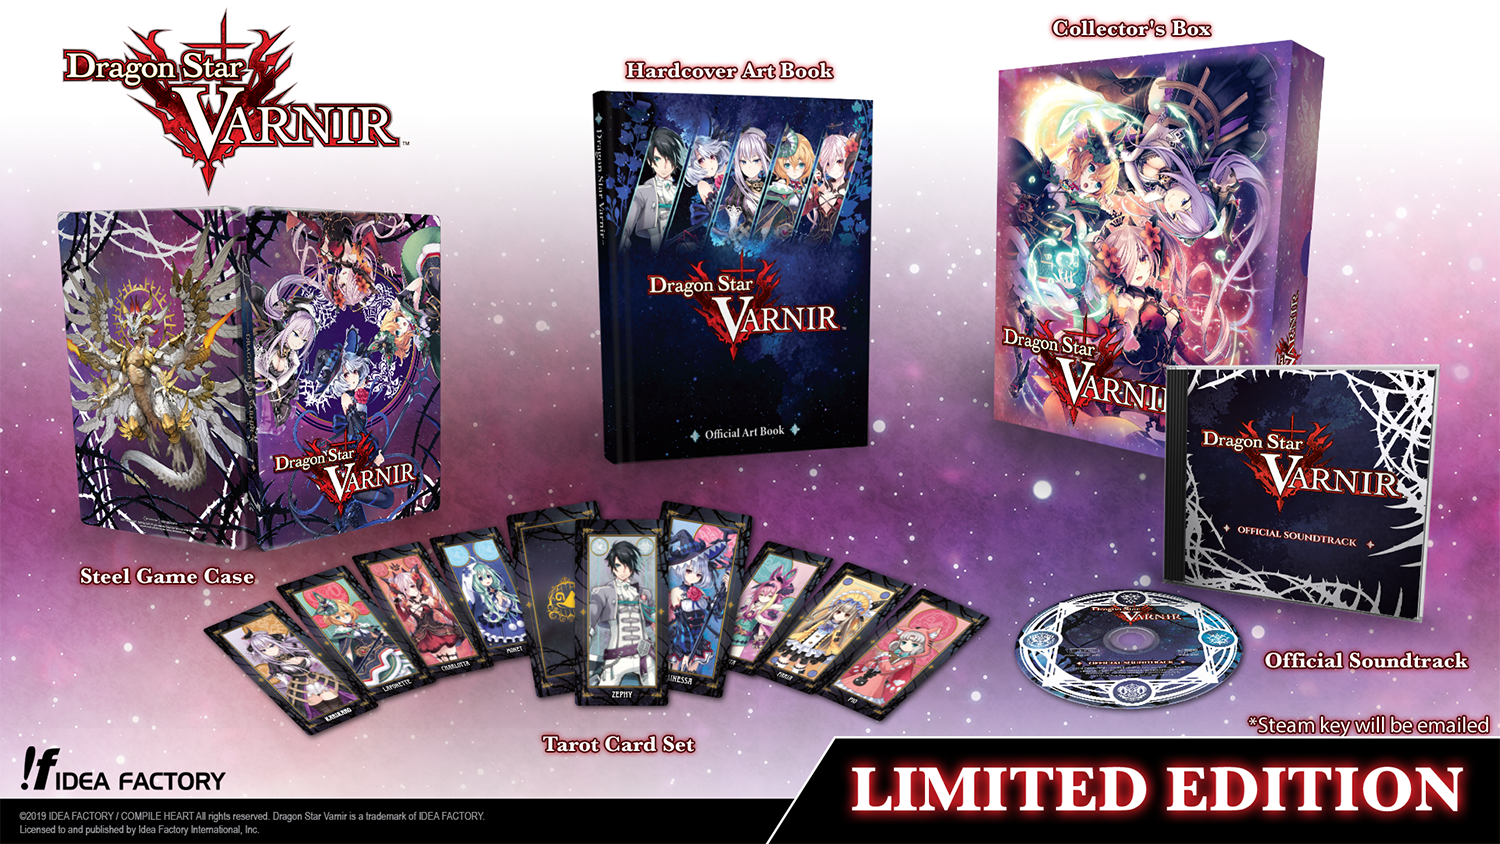 Purchase the Limited Edition of Dragon Star Varnir on 10/8! 